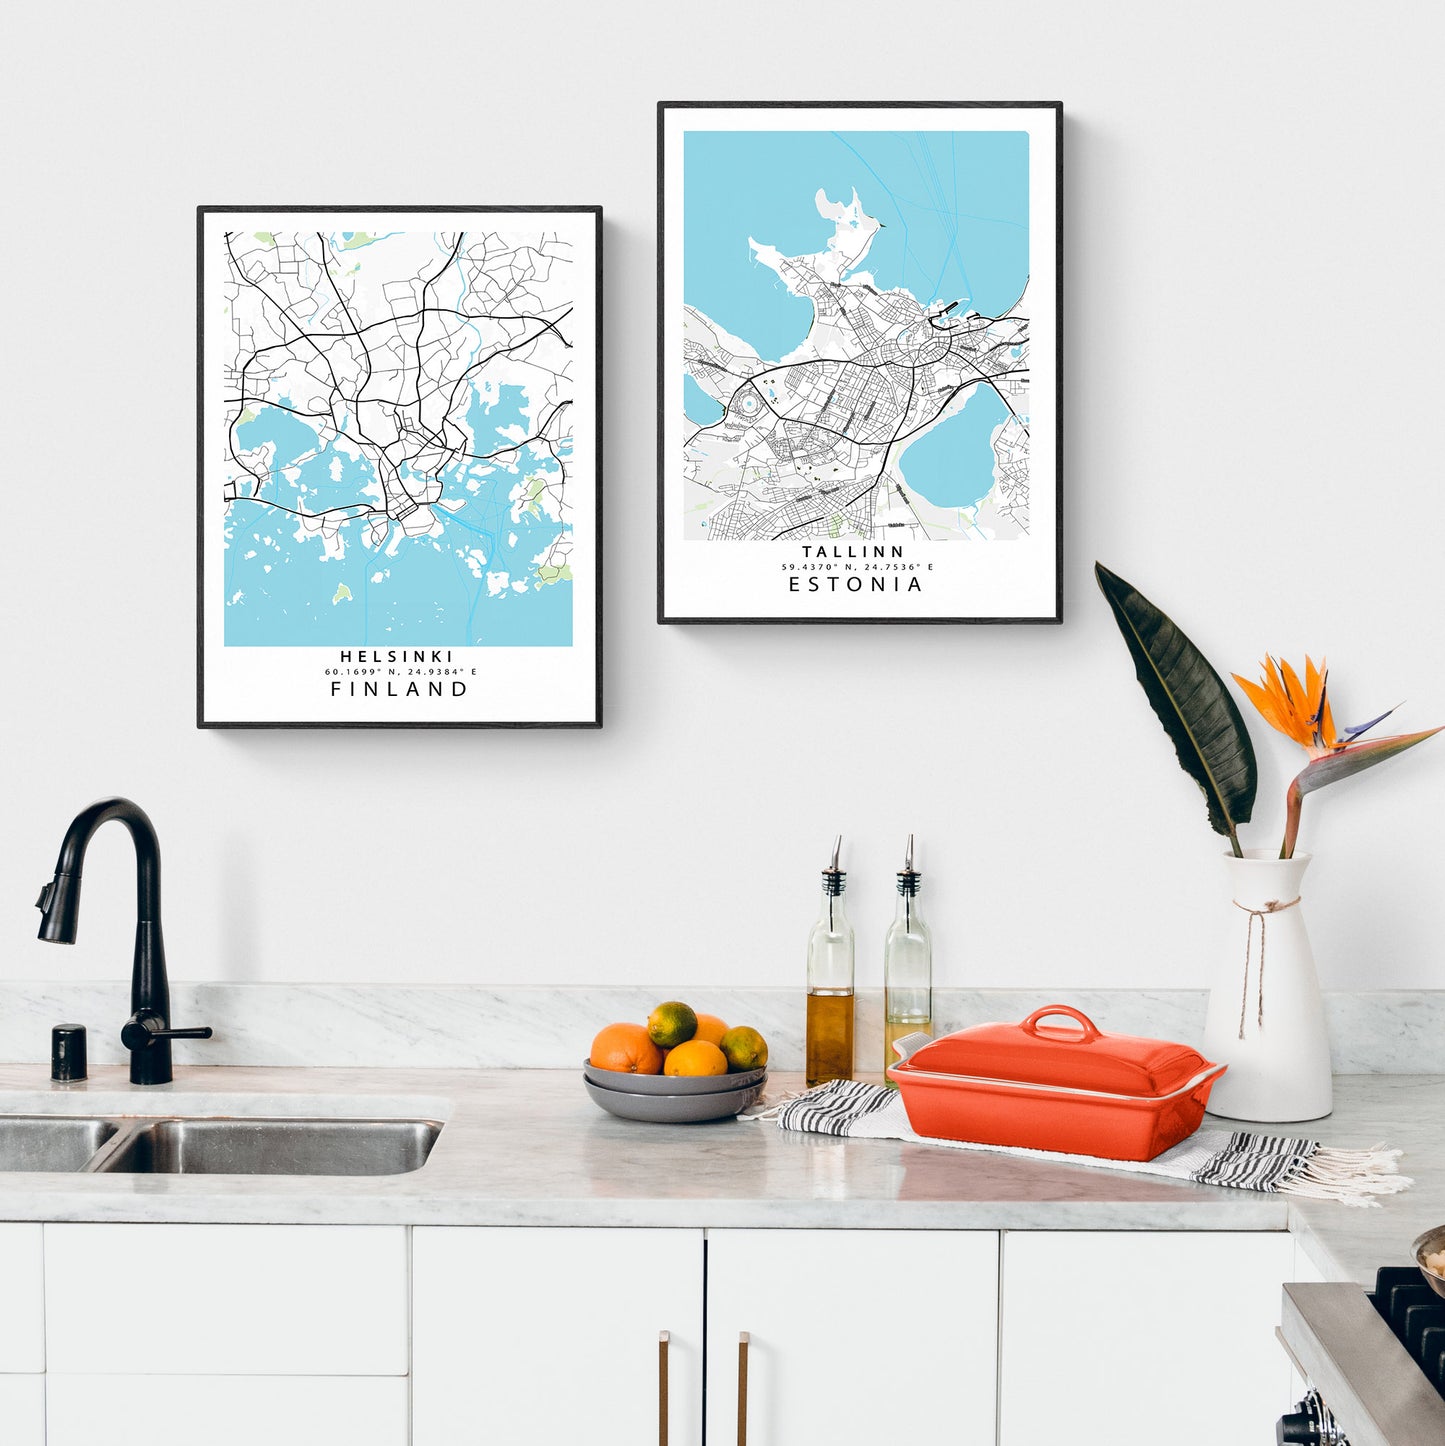 Discover the city of Tallinn with our exclusive custom street map posters! Perfect for tracking your travels or adding a touch of wanderlust to your space, these beautiful poster prints are the only maps you'll ever need. So grab your compass and set off on a graphic journey with our world-class maps and cities posters!